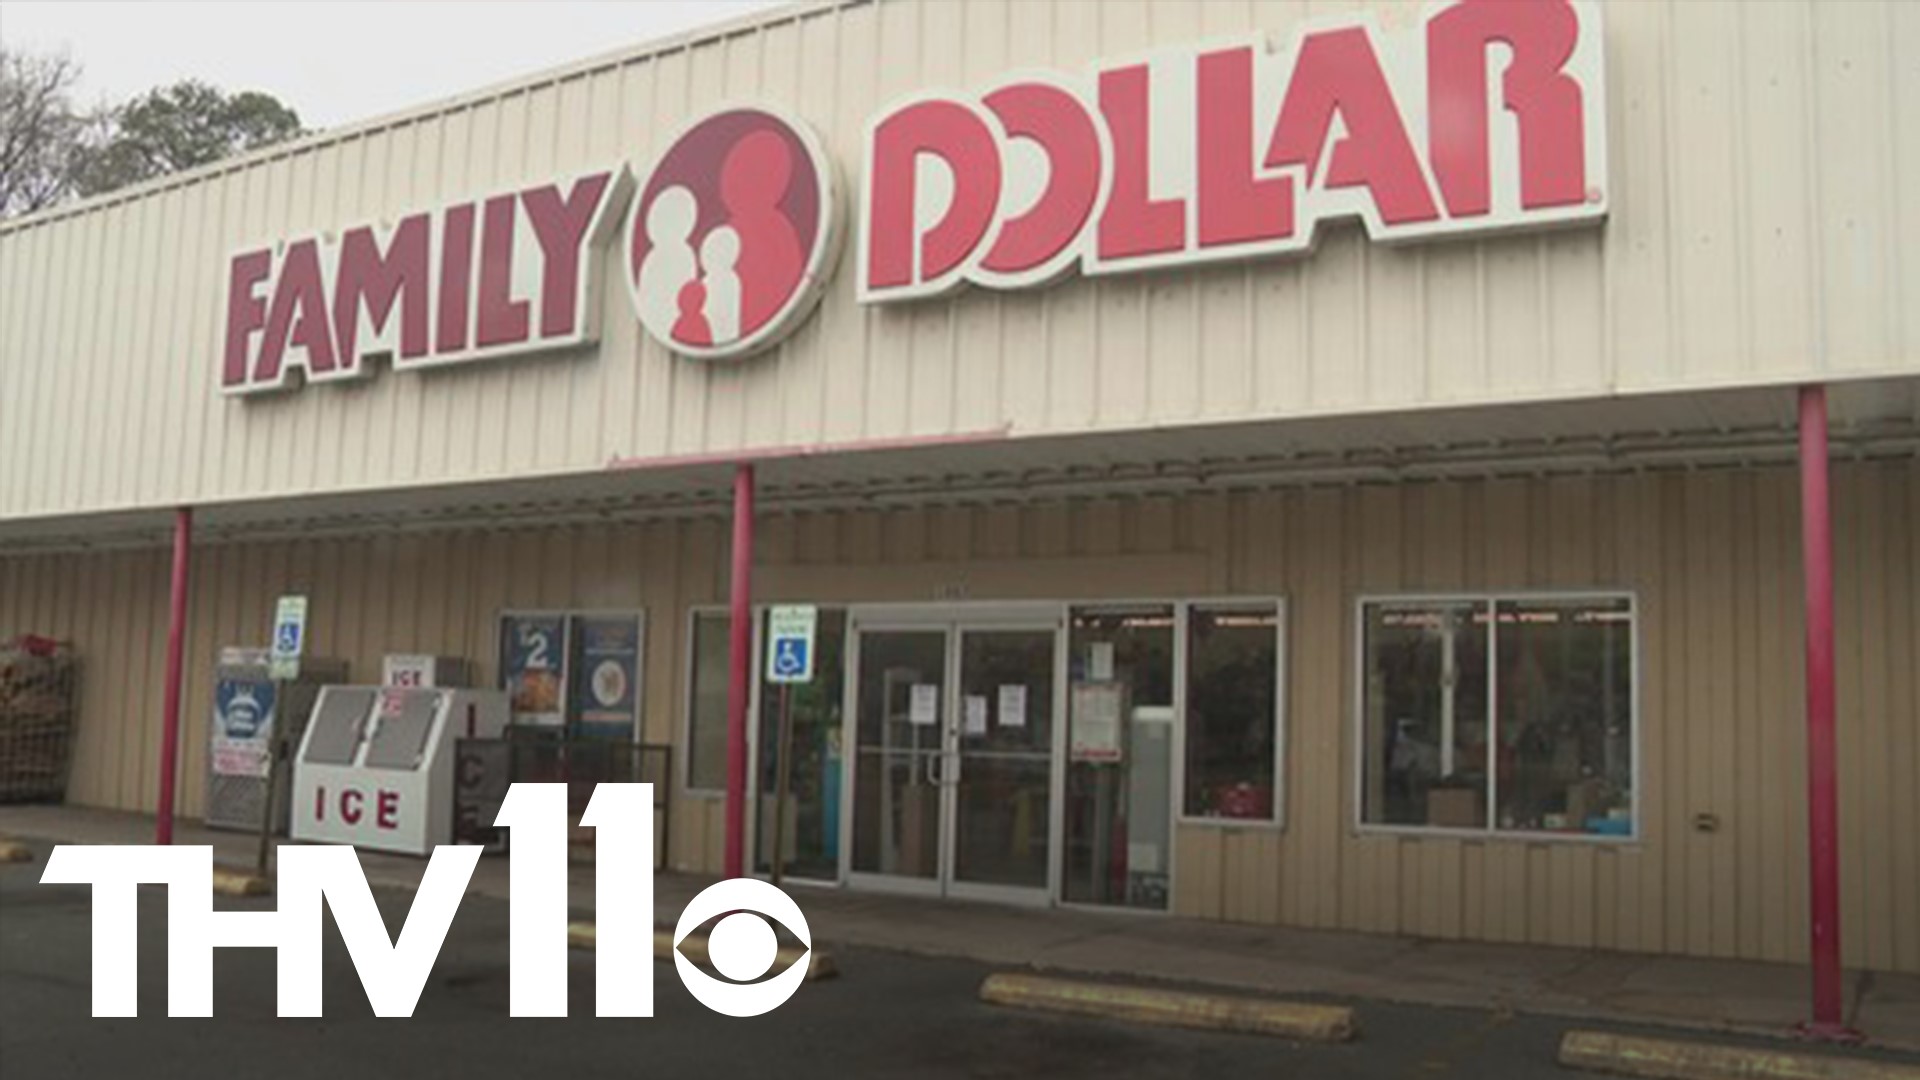 A recently discovered rodent infestation in an Arkansas warehouse has forced hundreds of Family Dollar stores to close their doors.